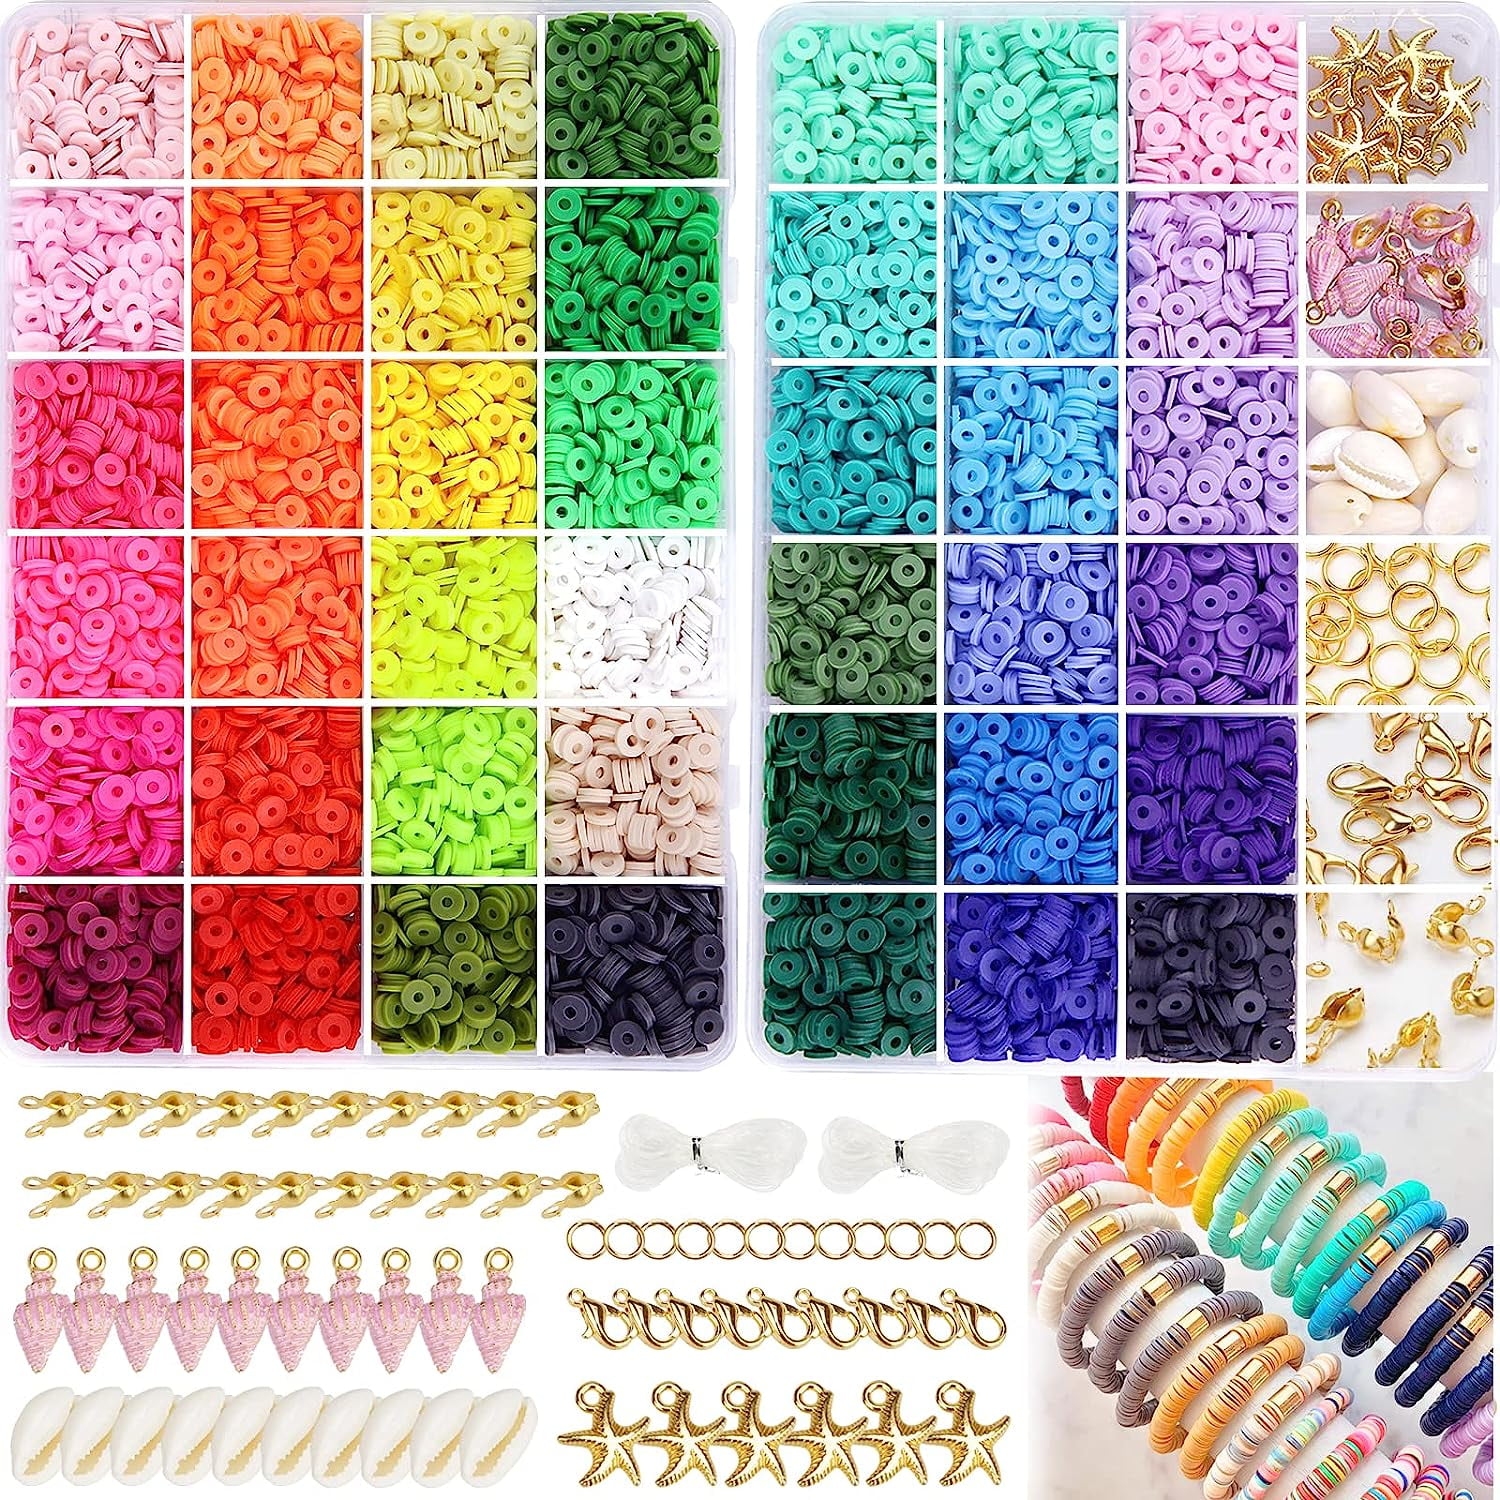 MIIIM 3600 PCS 10 Strands Clay Beads Polymer Clay Beads for